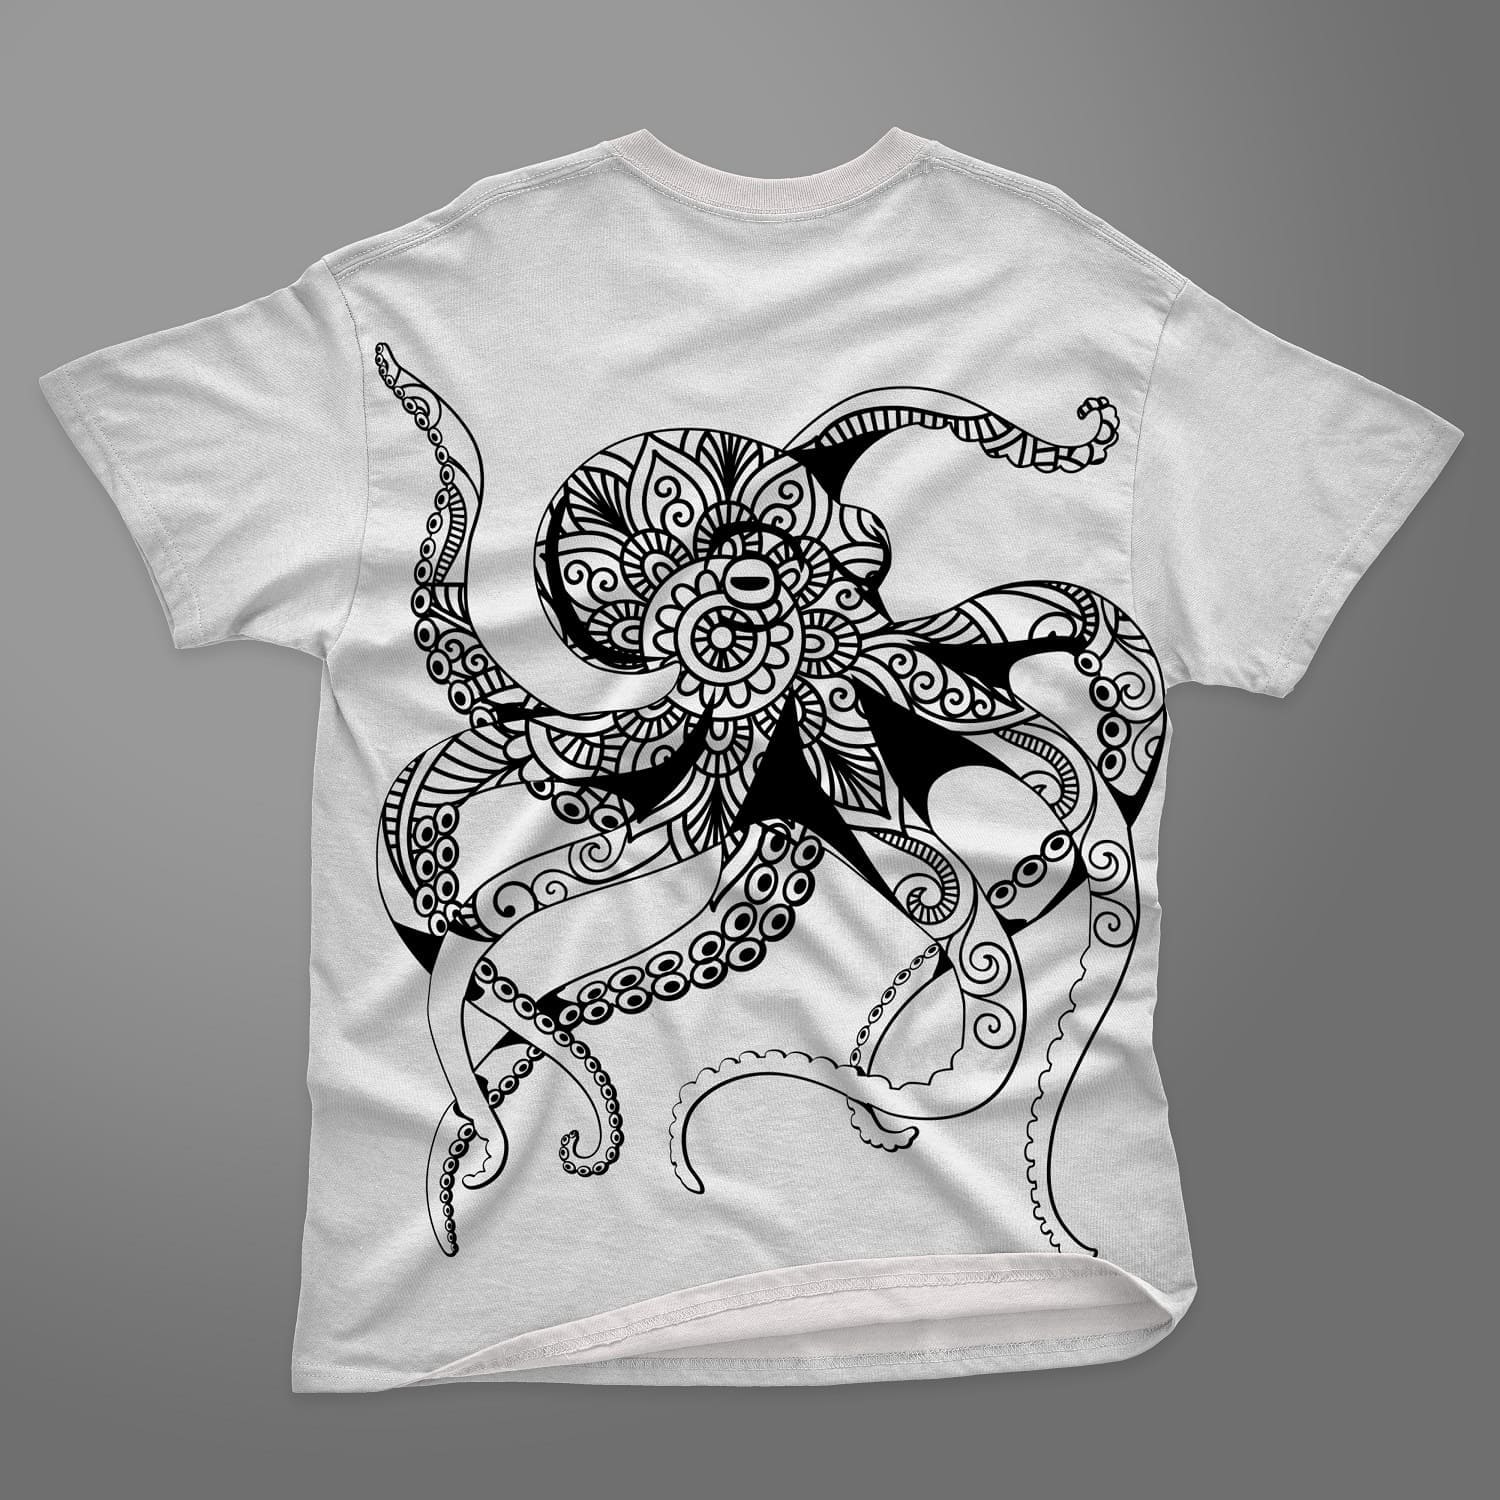 White t-shirt with the image of an octopus mandala close-up on a gray background.